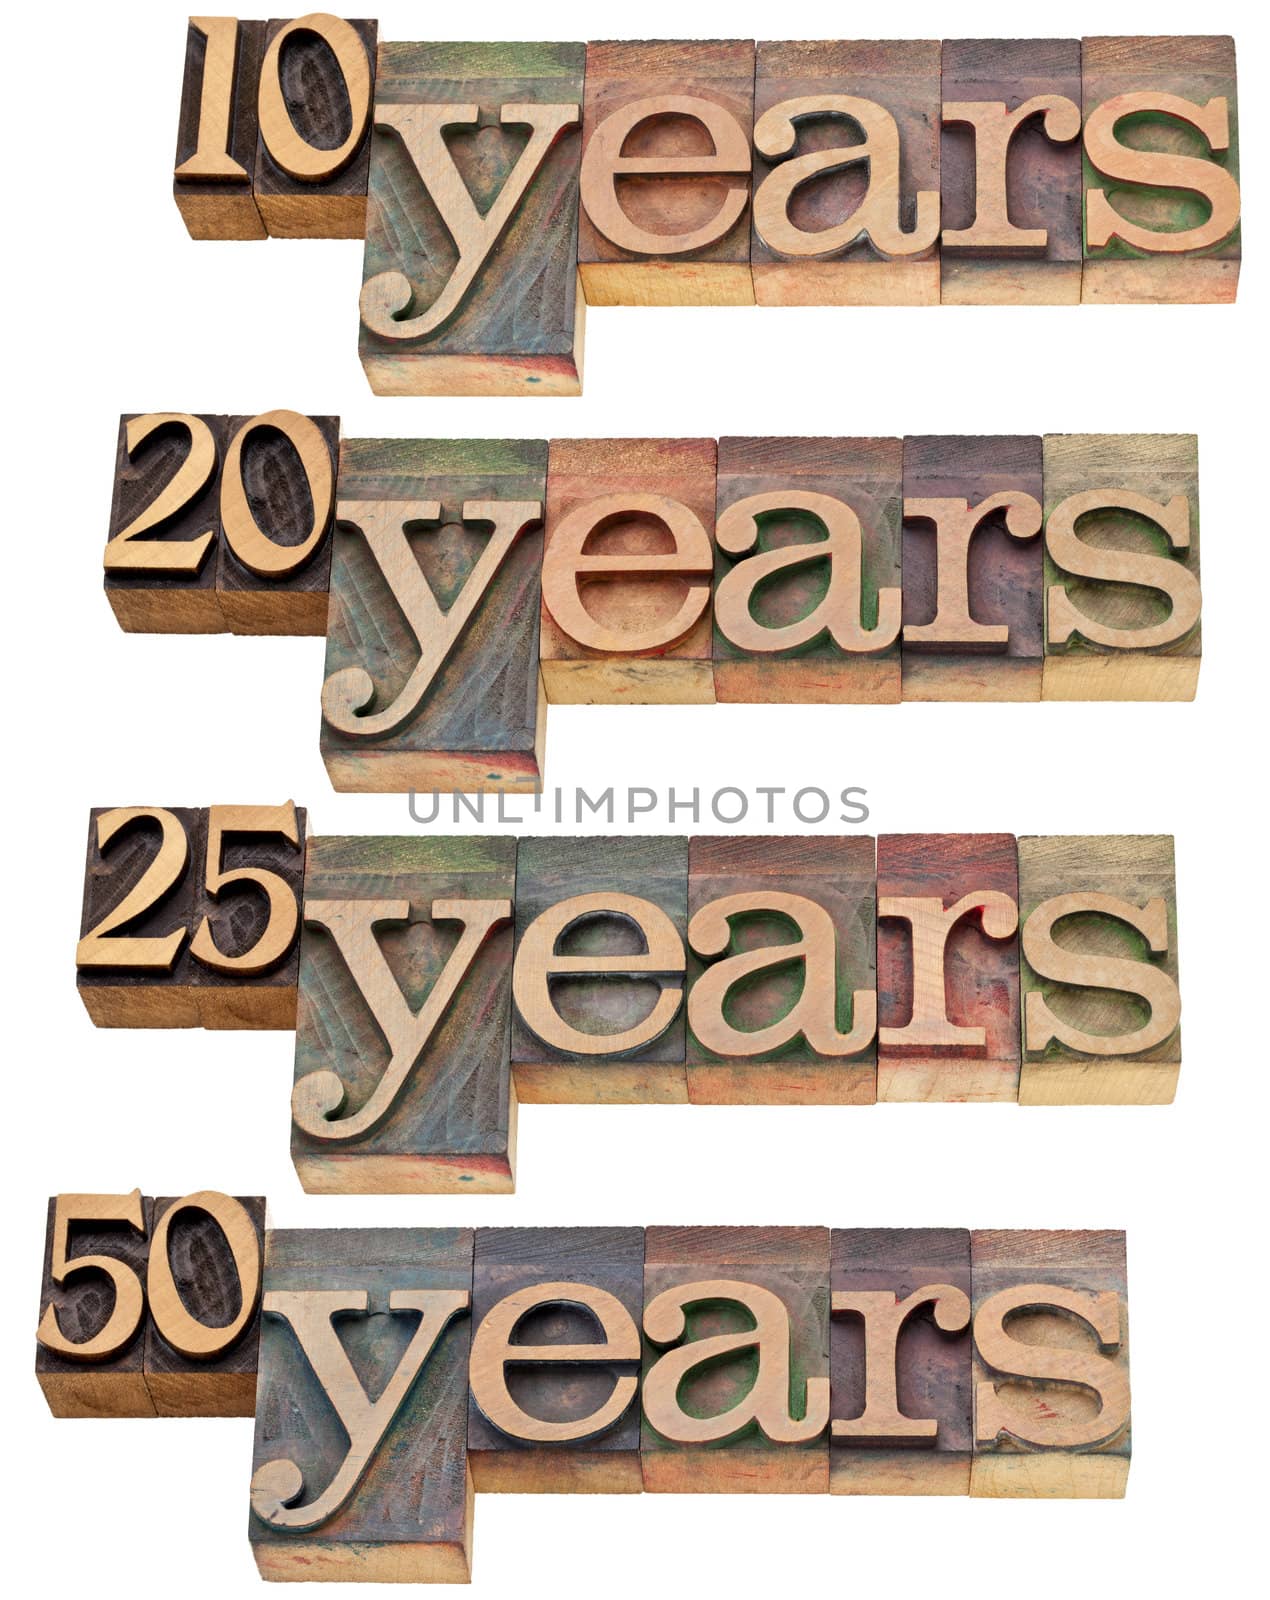 anniversary concept - 10, 20 ,25, 50 years - isolated text in vintage wood letterpress printing blocks stained by color inks